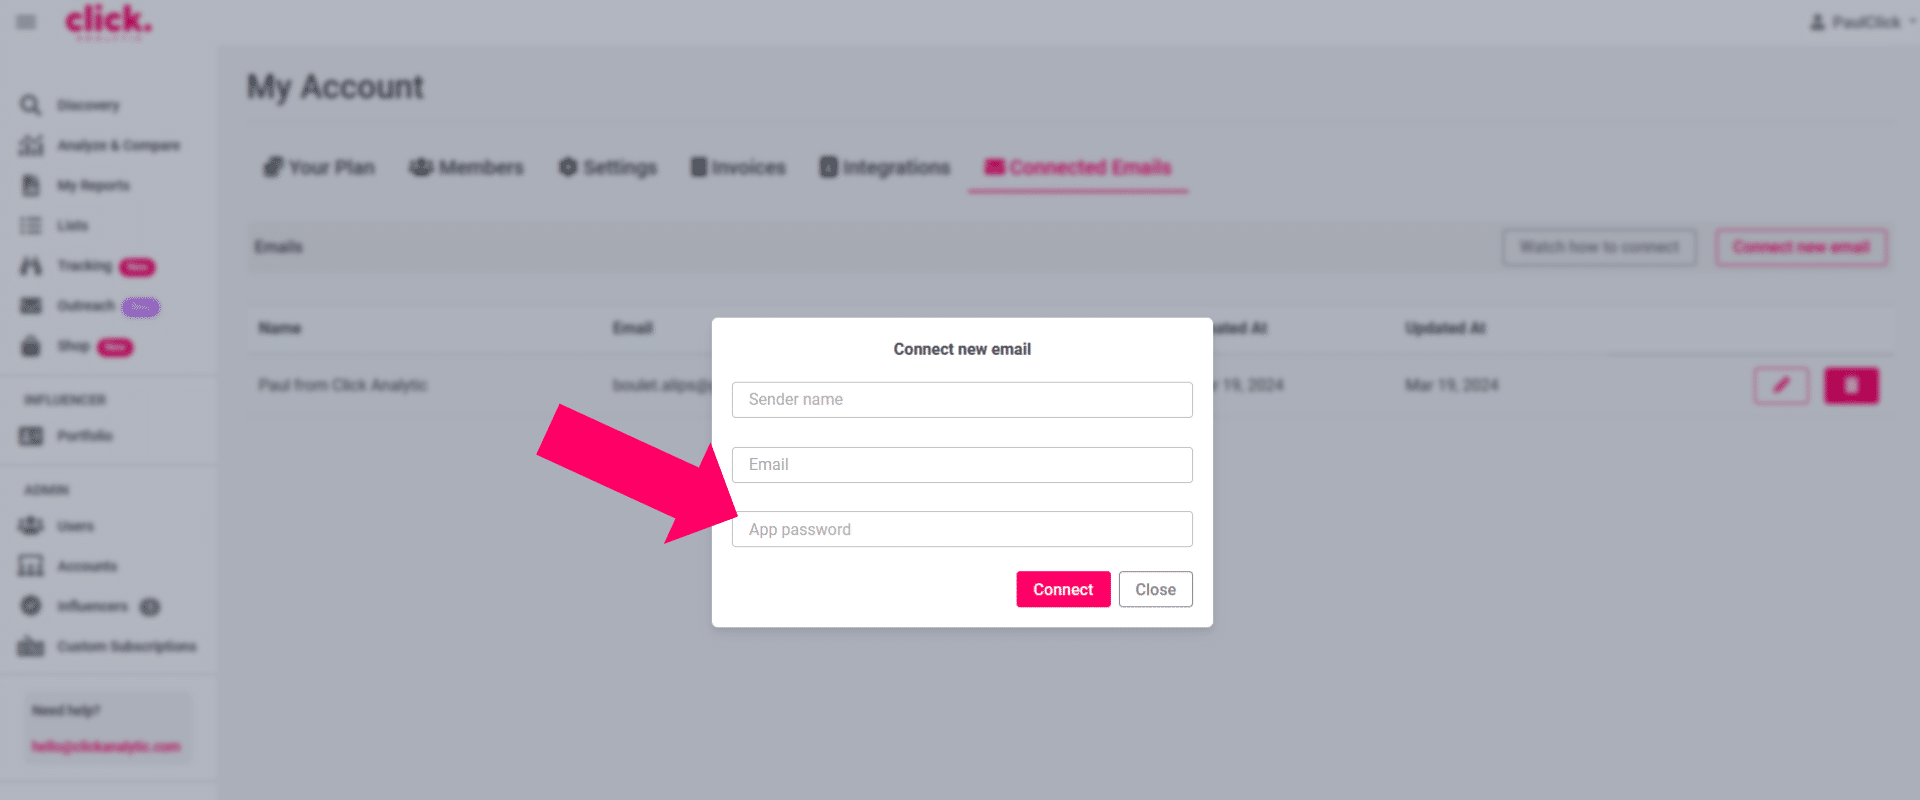 Open Click Settings: Navigate to ’My Account’ in Click and then ‘Connected Emails’.<br />
Create Your Email: Click on ‘Connect New Email’.<br />
Enter Your Details: Provide your name, email address, and the app password you generated.